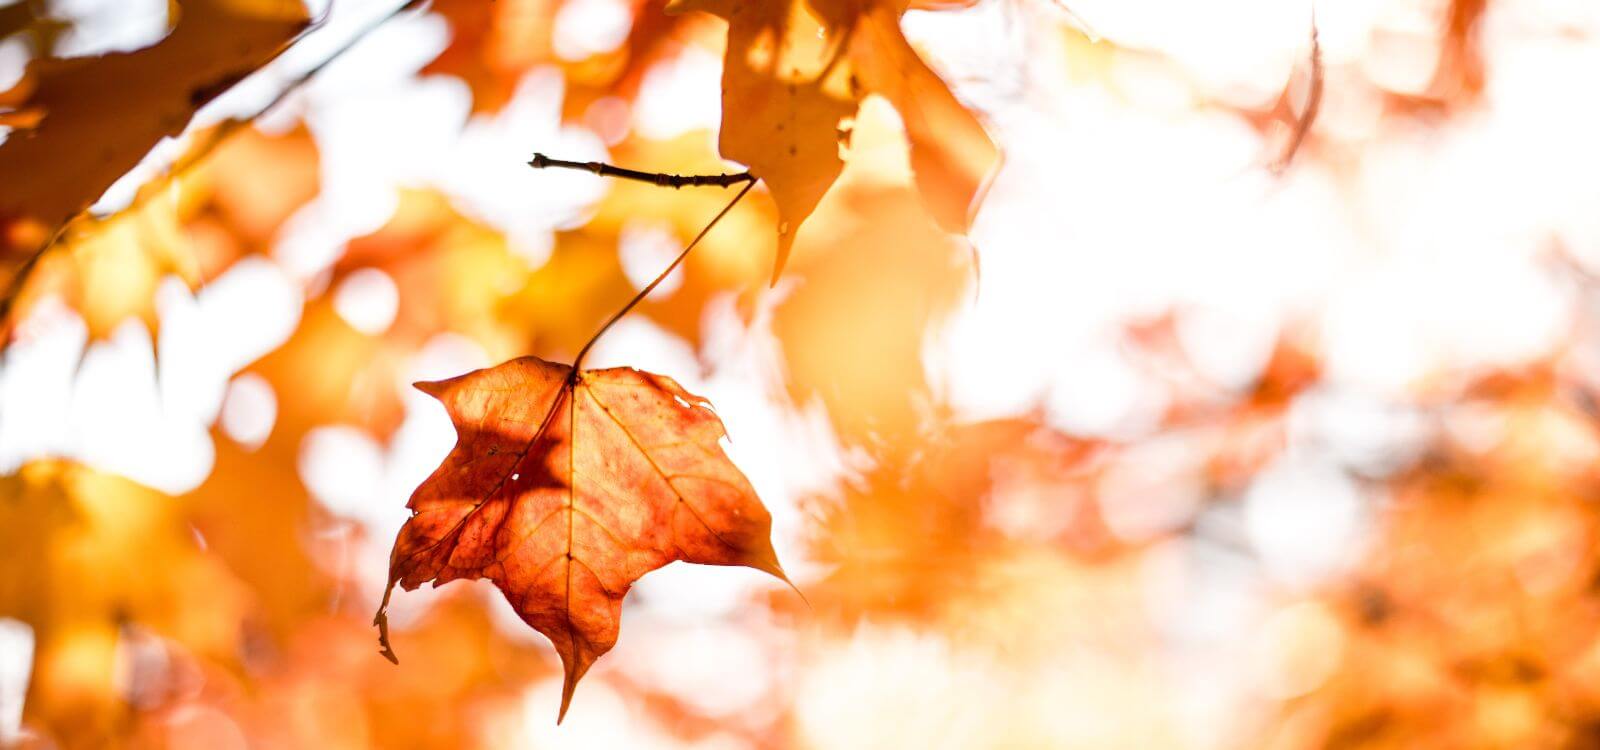 Vata Season: How To Stay Grounded and Nourished in Autumn